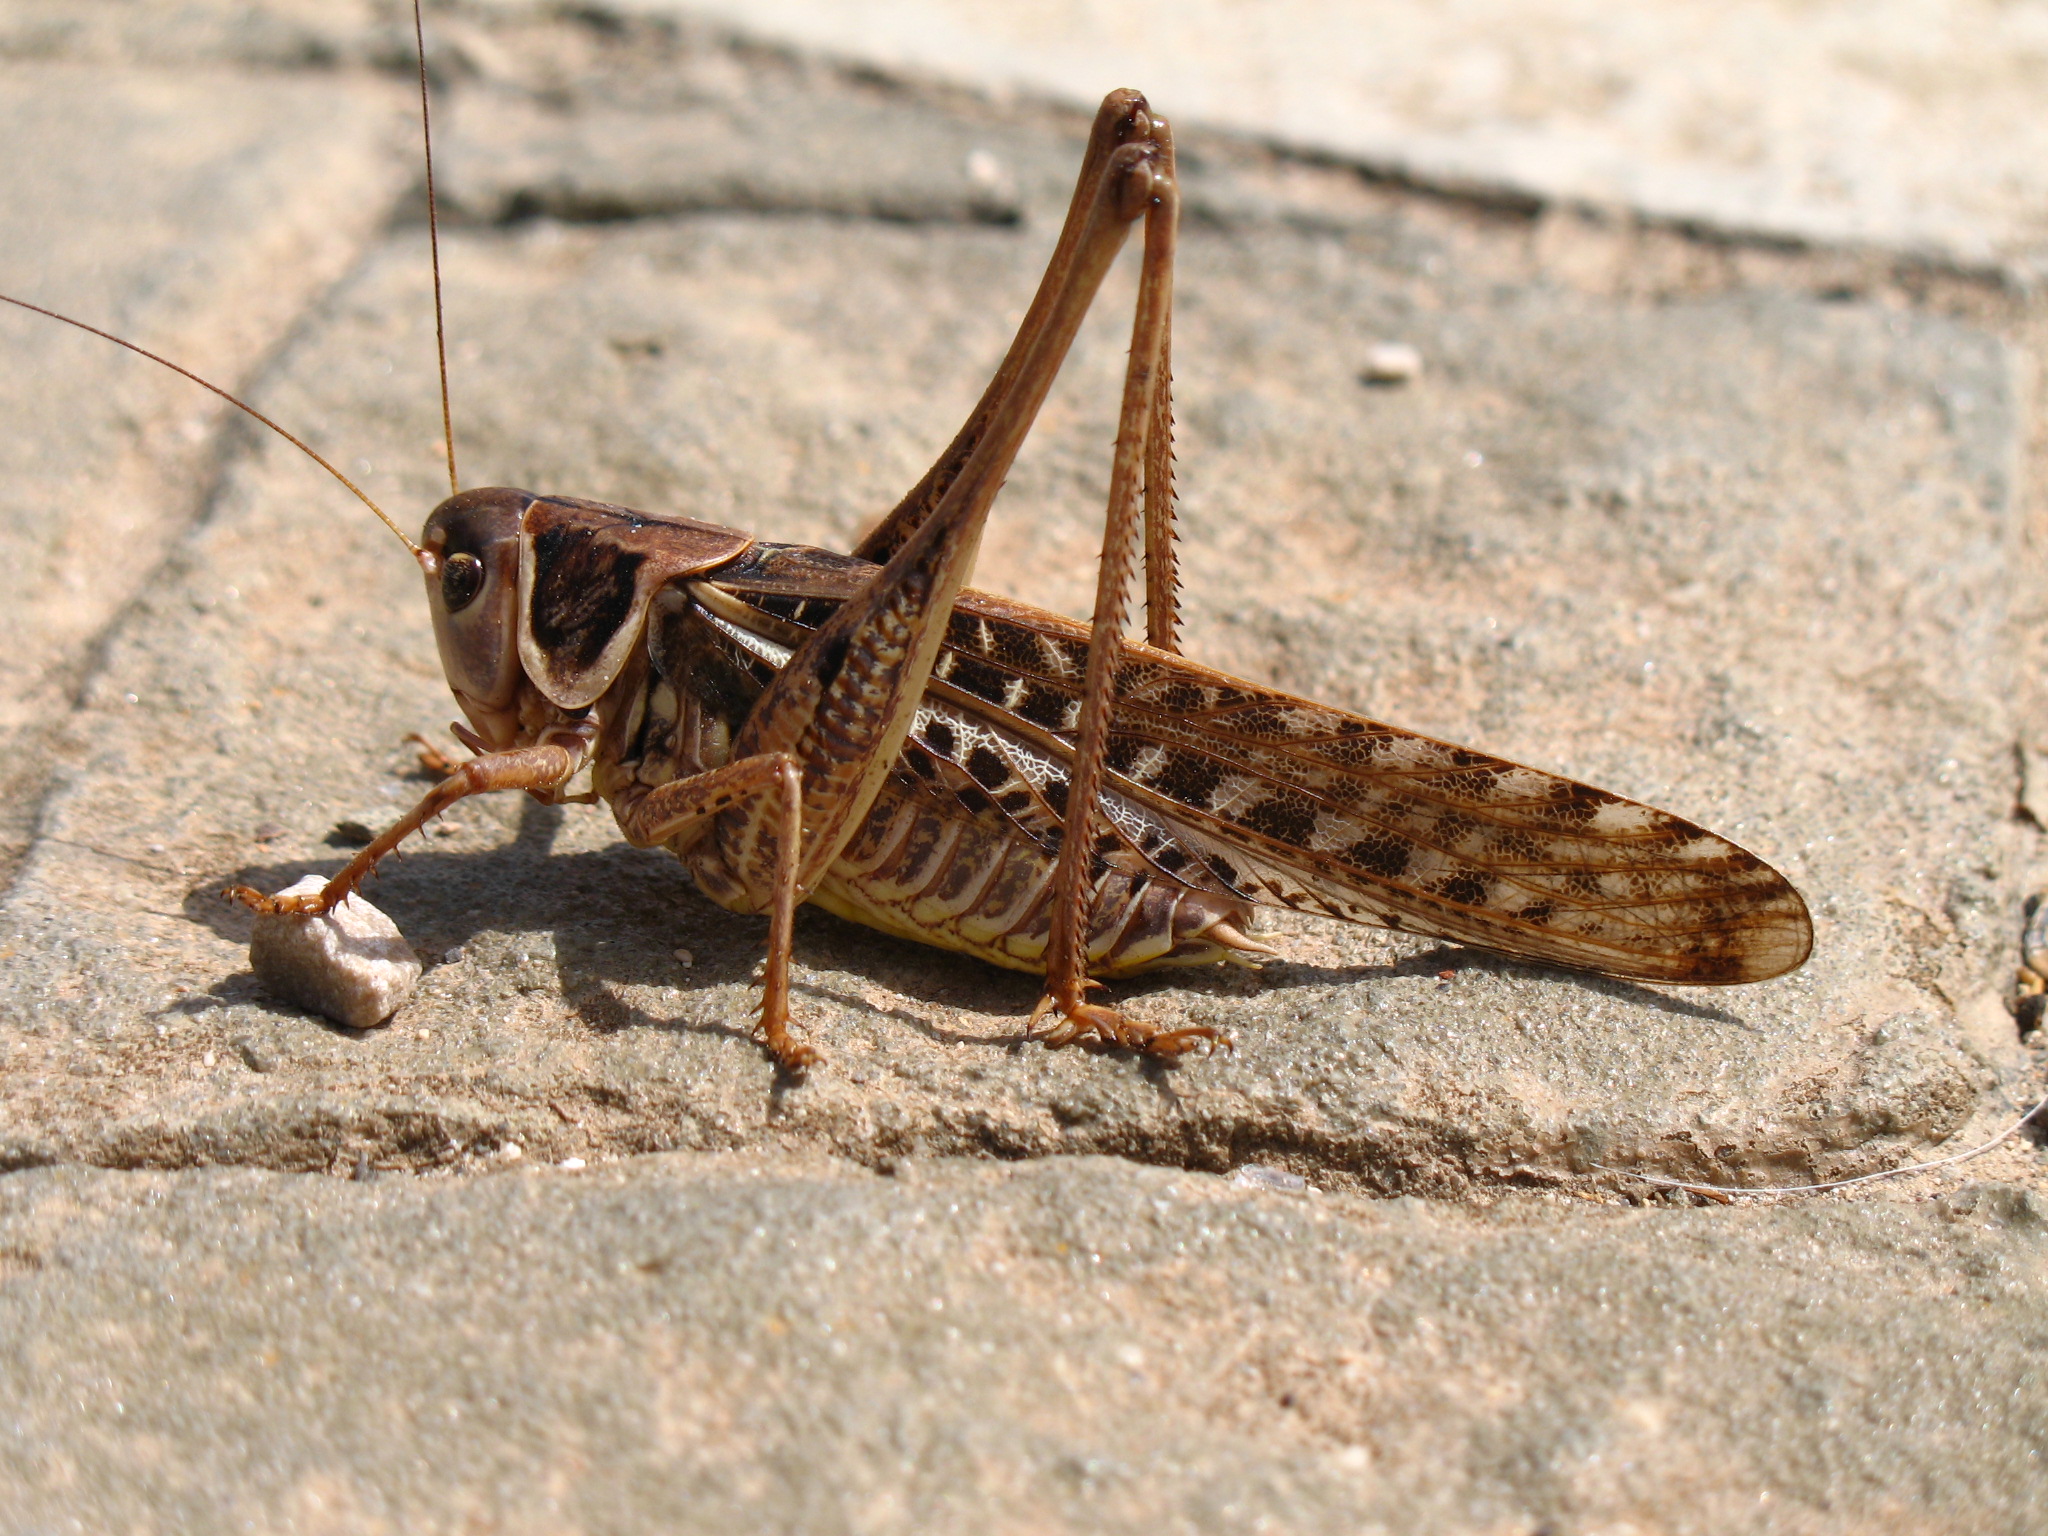 a mantisca praying with an outstretched arm and leg